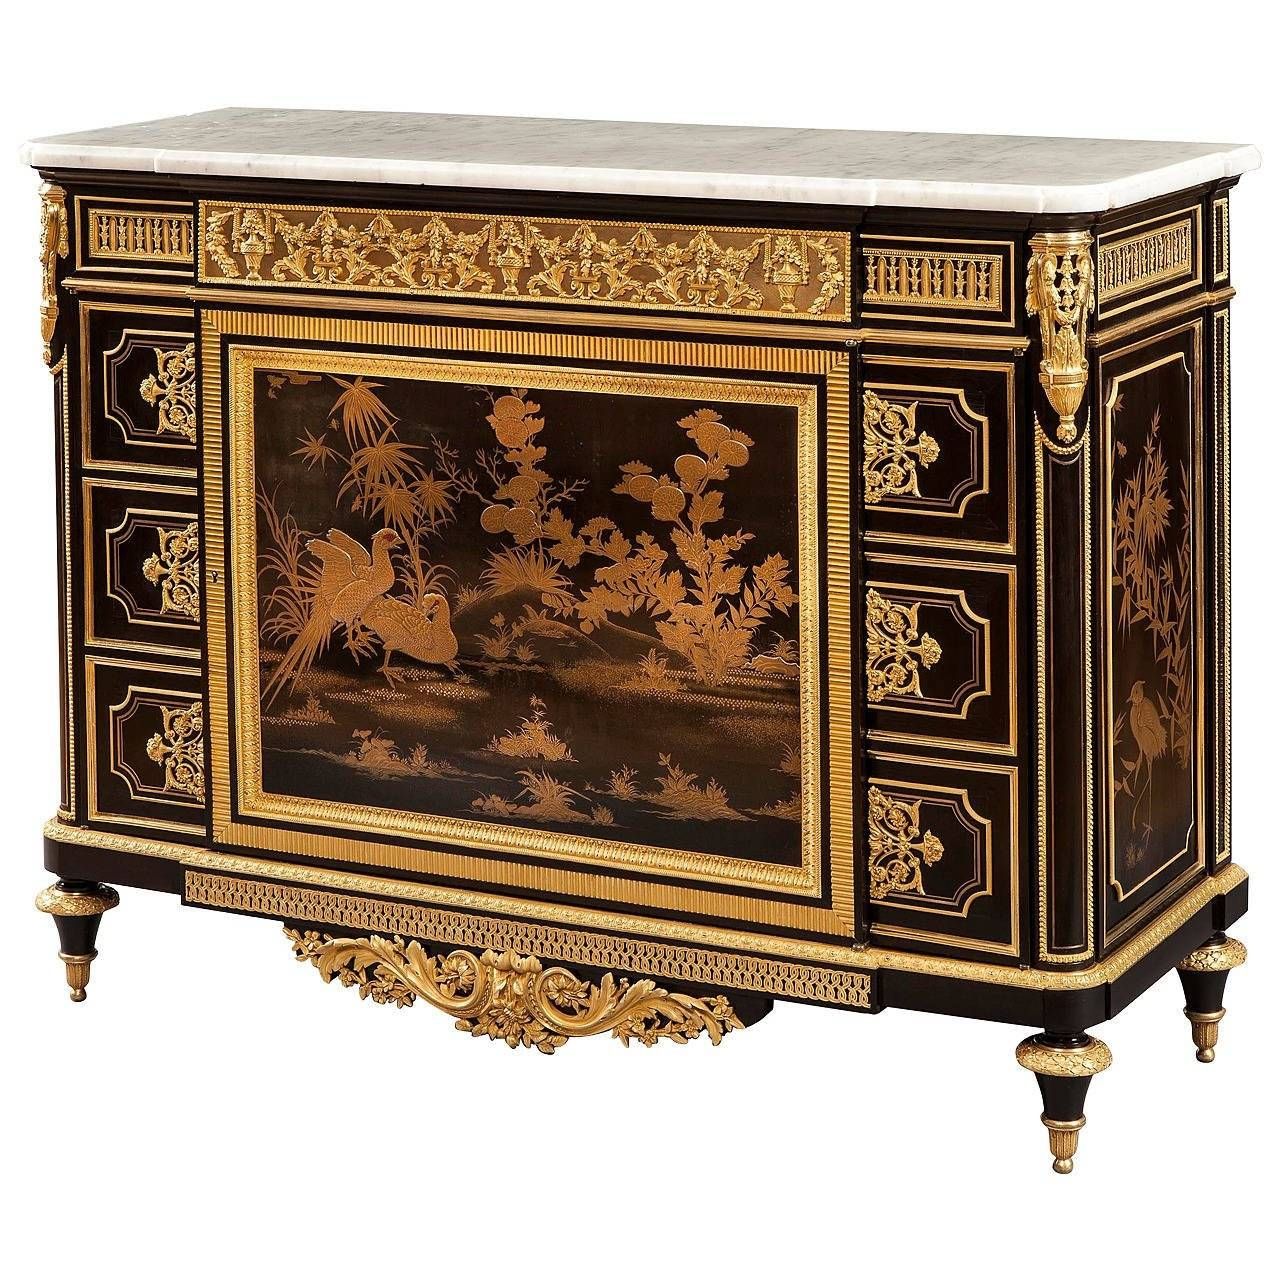 French 19th Century Japanese Black Lacquer Cabinet In The Pertaining To Chinoiserie Sideboard (View 12 of 20)